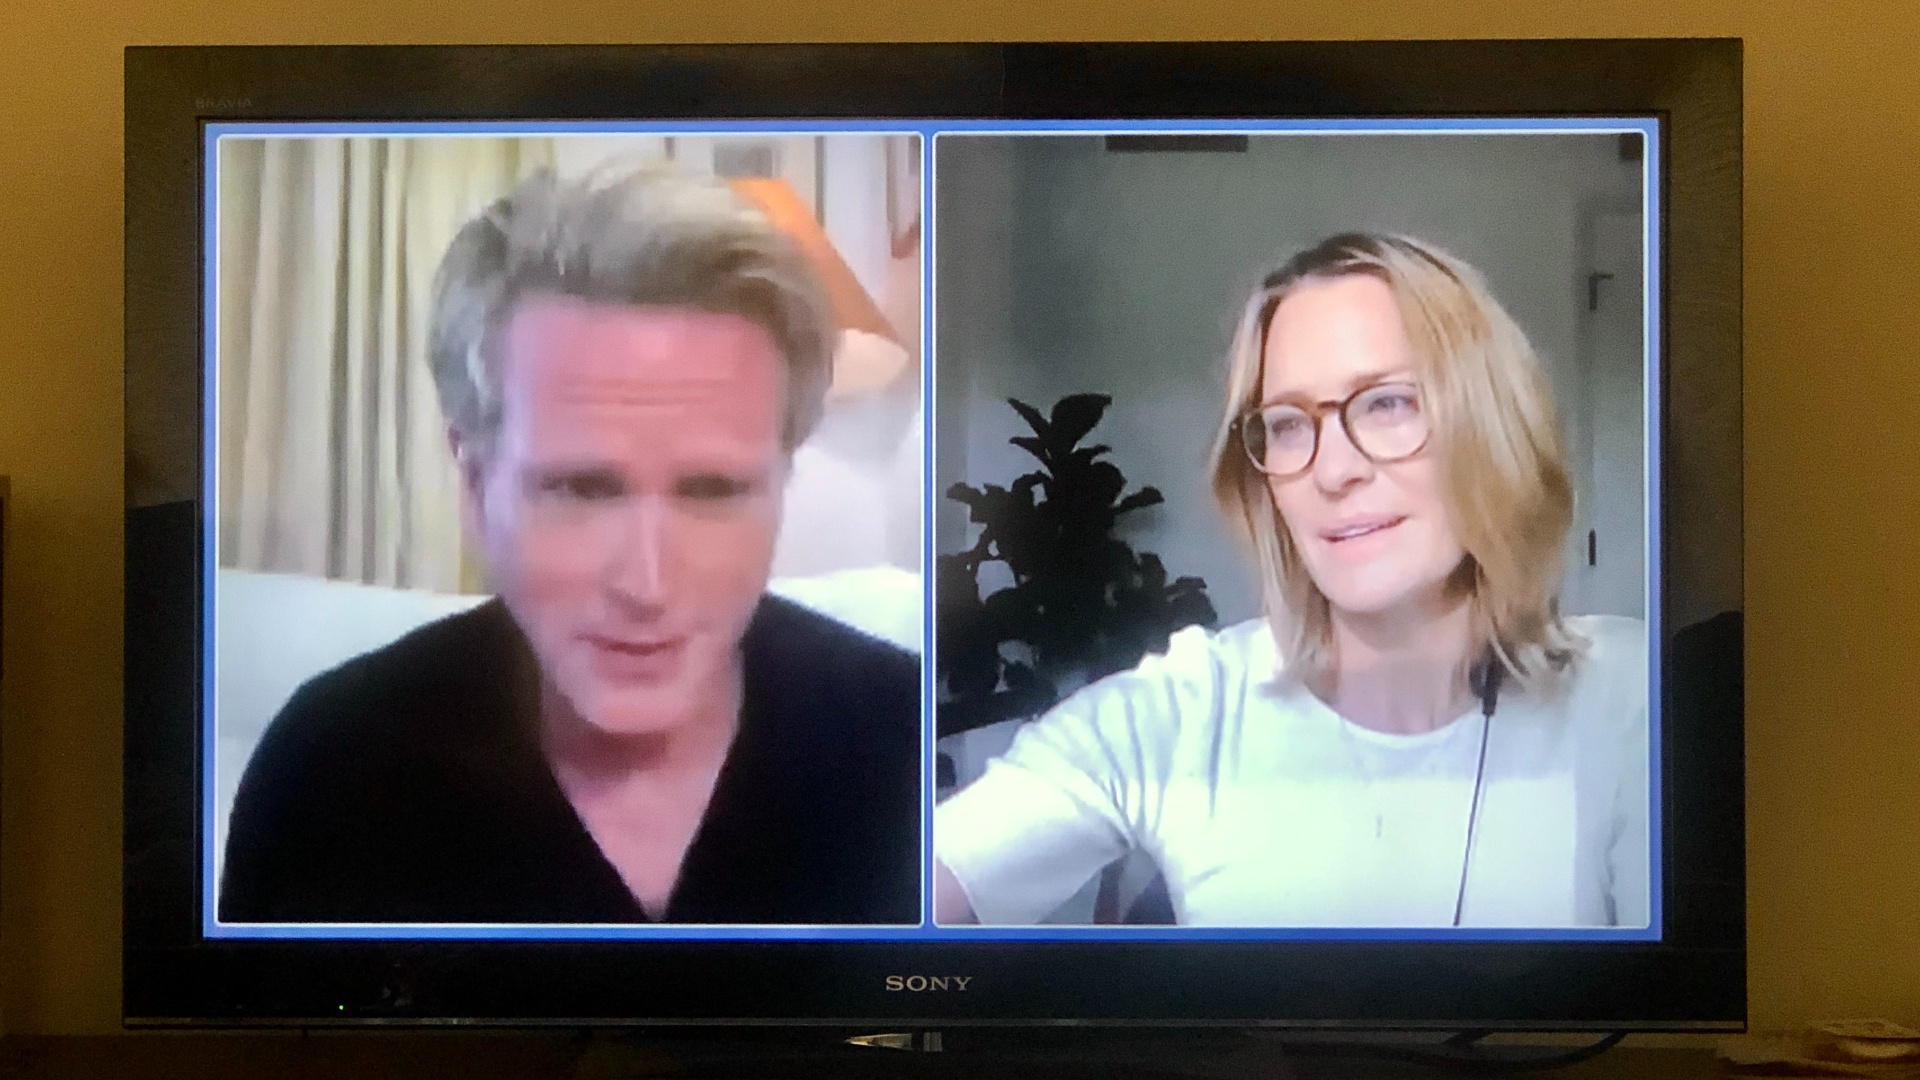 Cary Elwes and Robin Wright in "The Princess Bride" Reunion